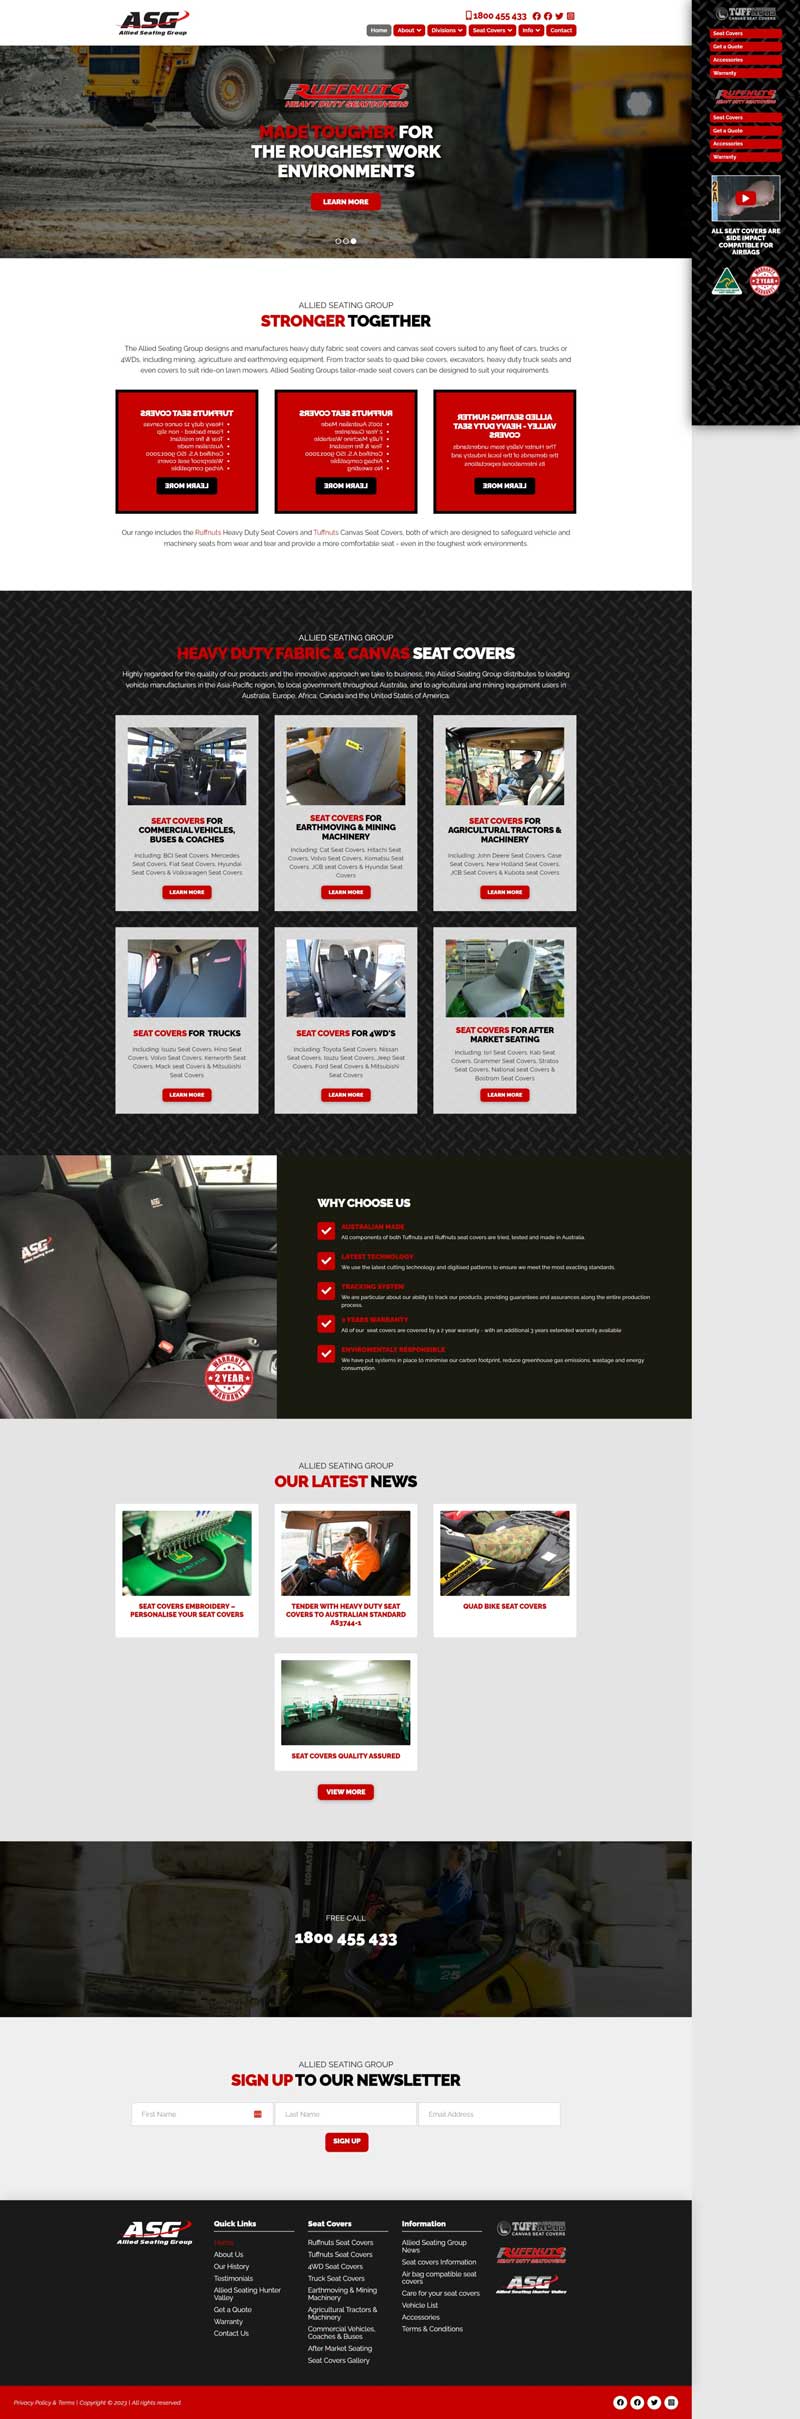 Allied Seating website designed by Big Red Bus Websites - example 2